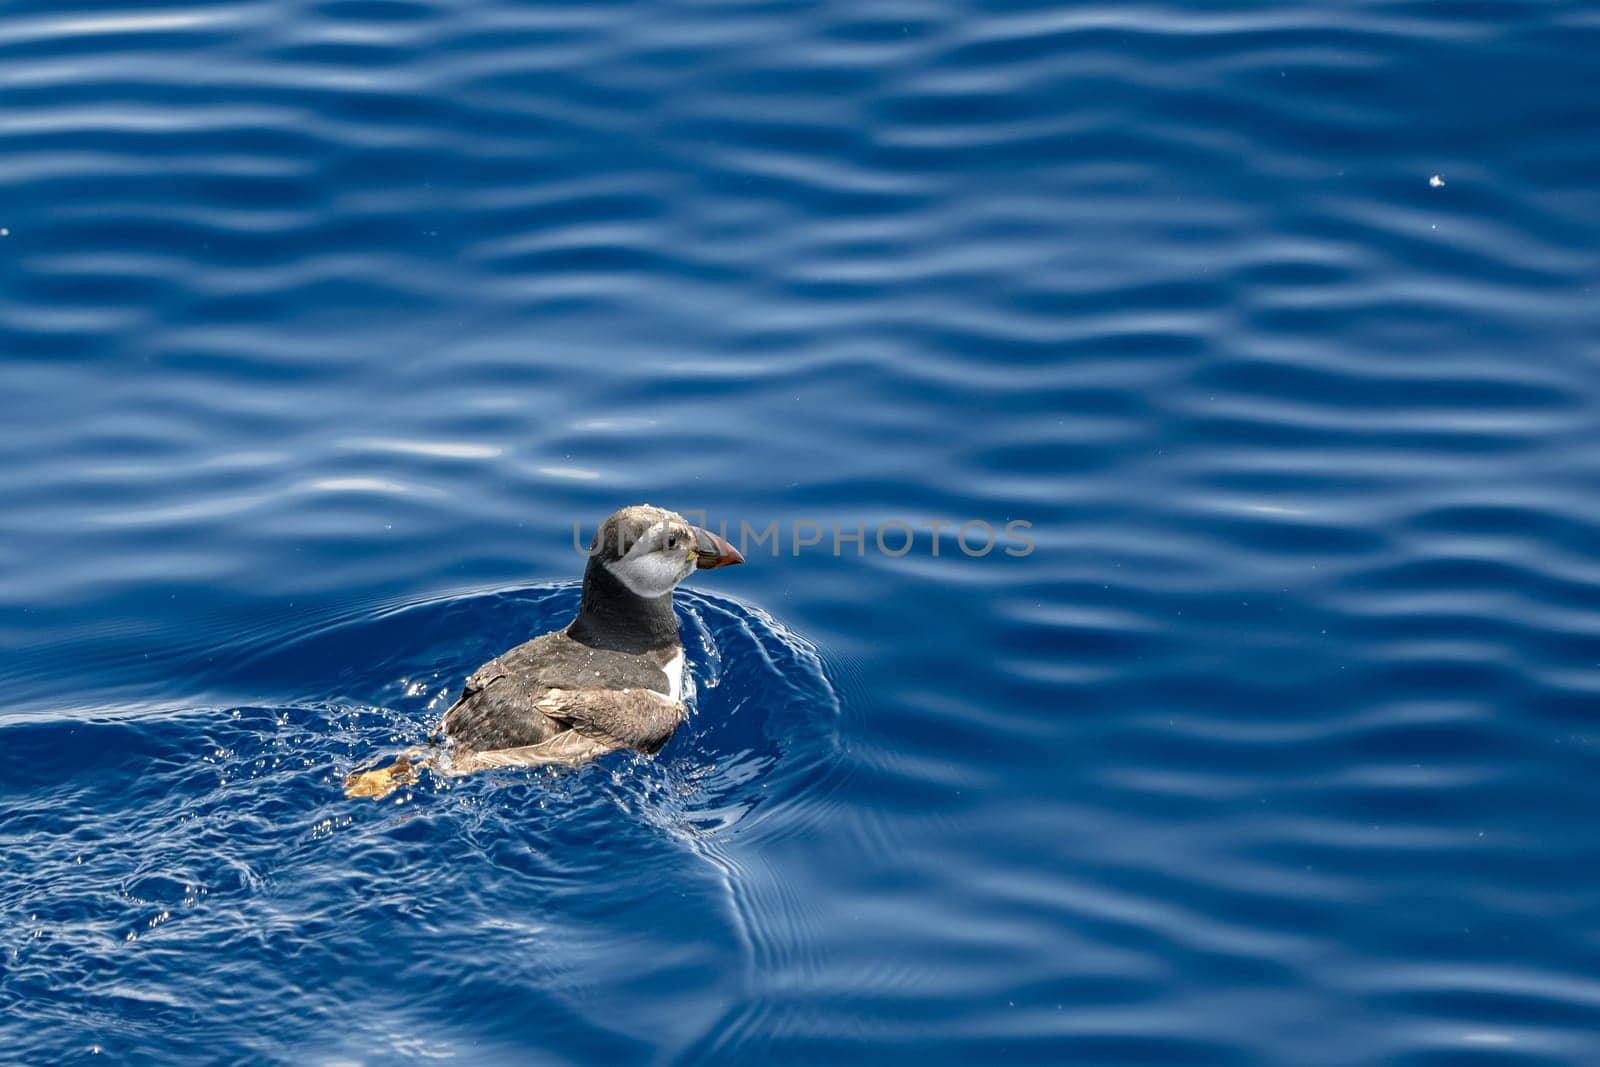 Puffin in mediterranean ligurian sea ultra rare to see by AndreaIzzotti